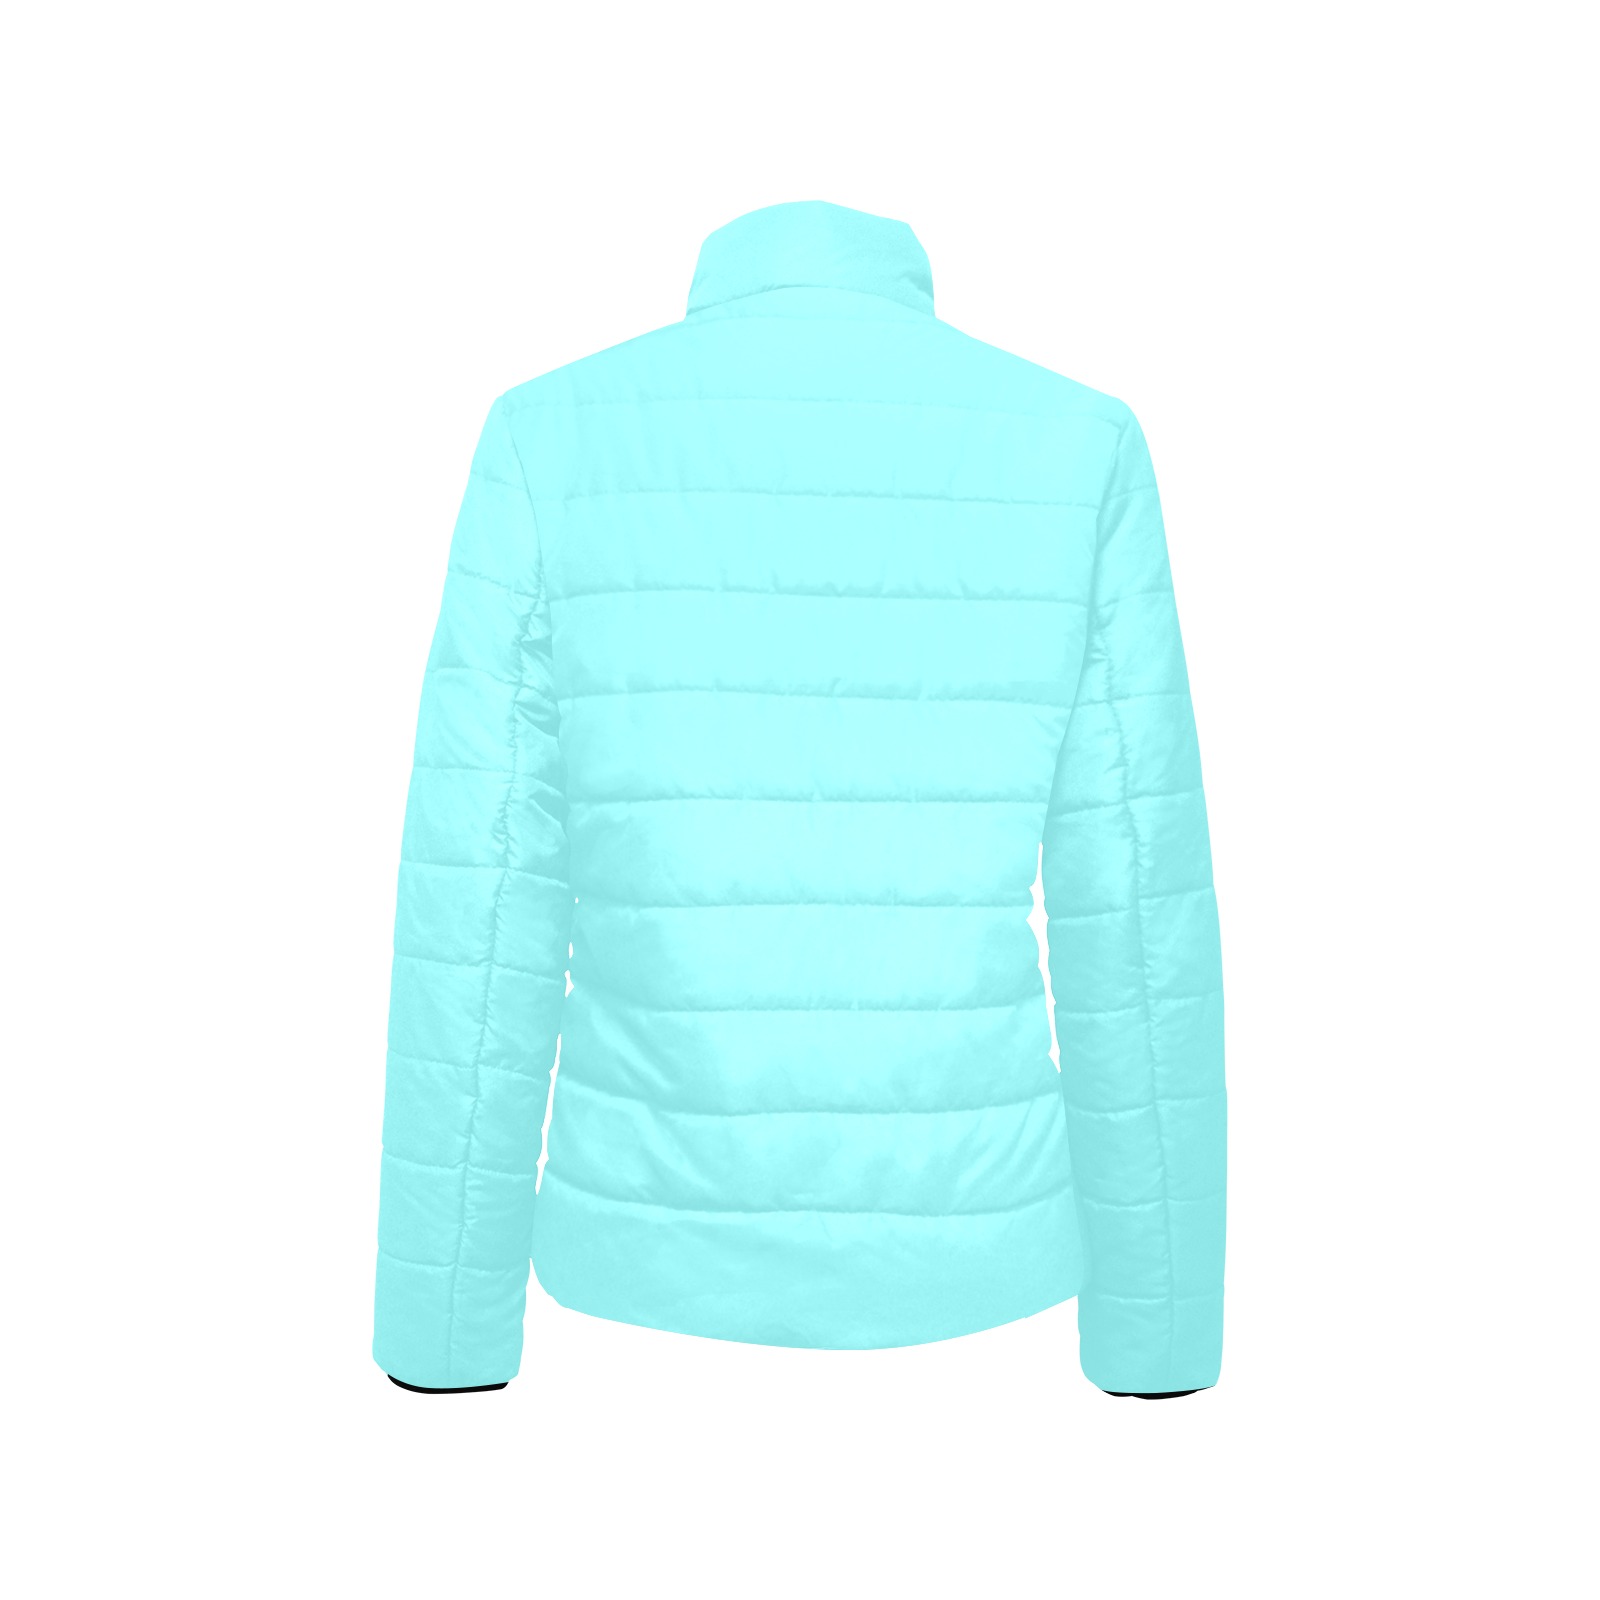 color ice blue Women's Stand Collar Padded Jacket (Model H41)